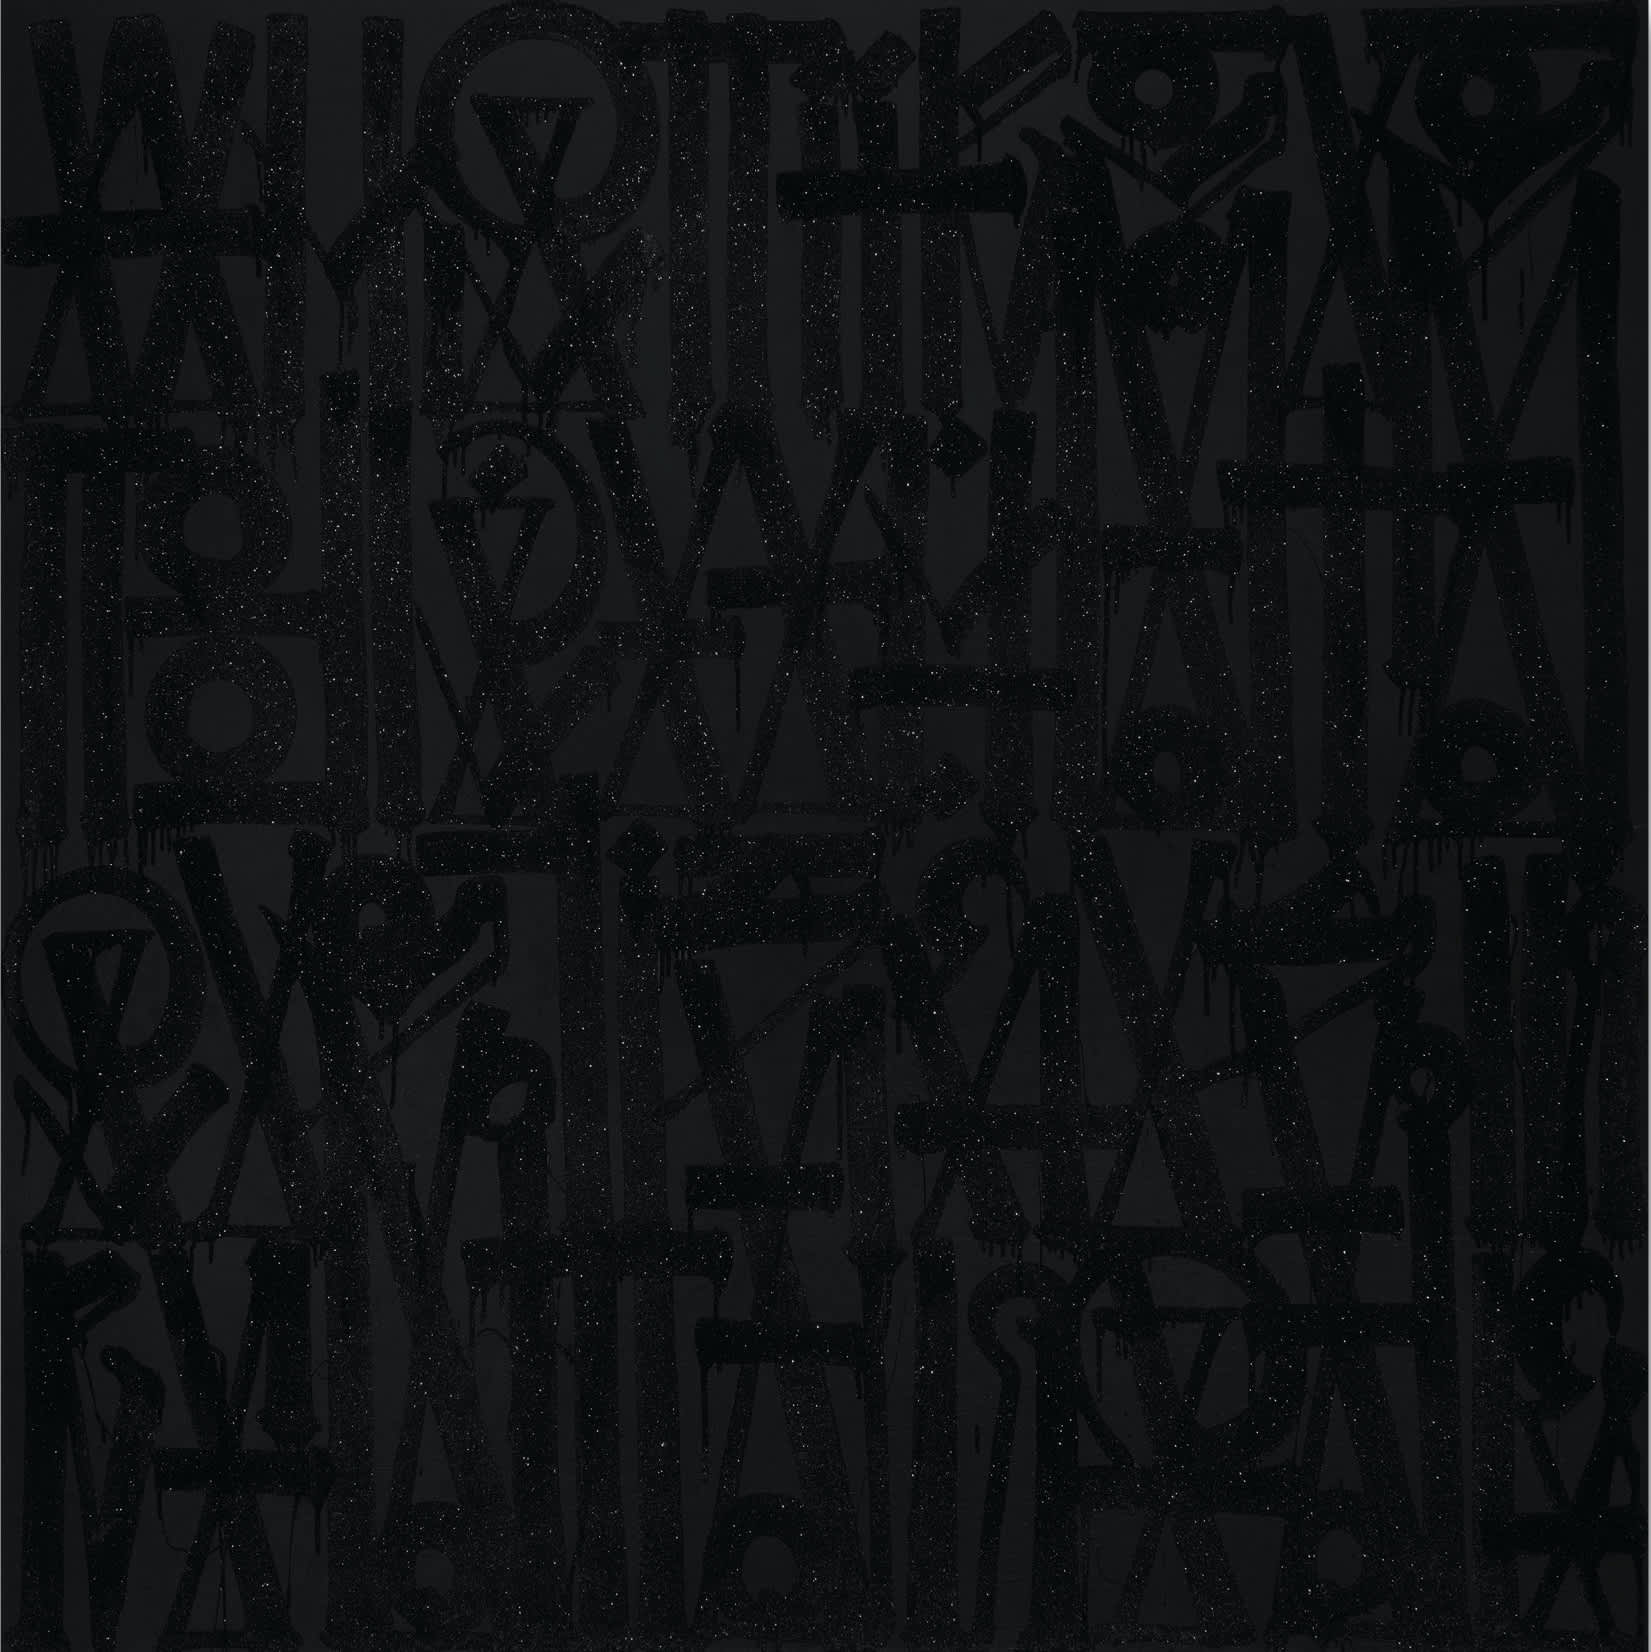 Retna, What if I told you